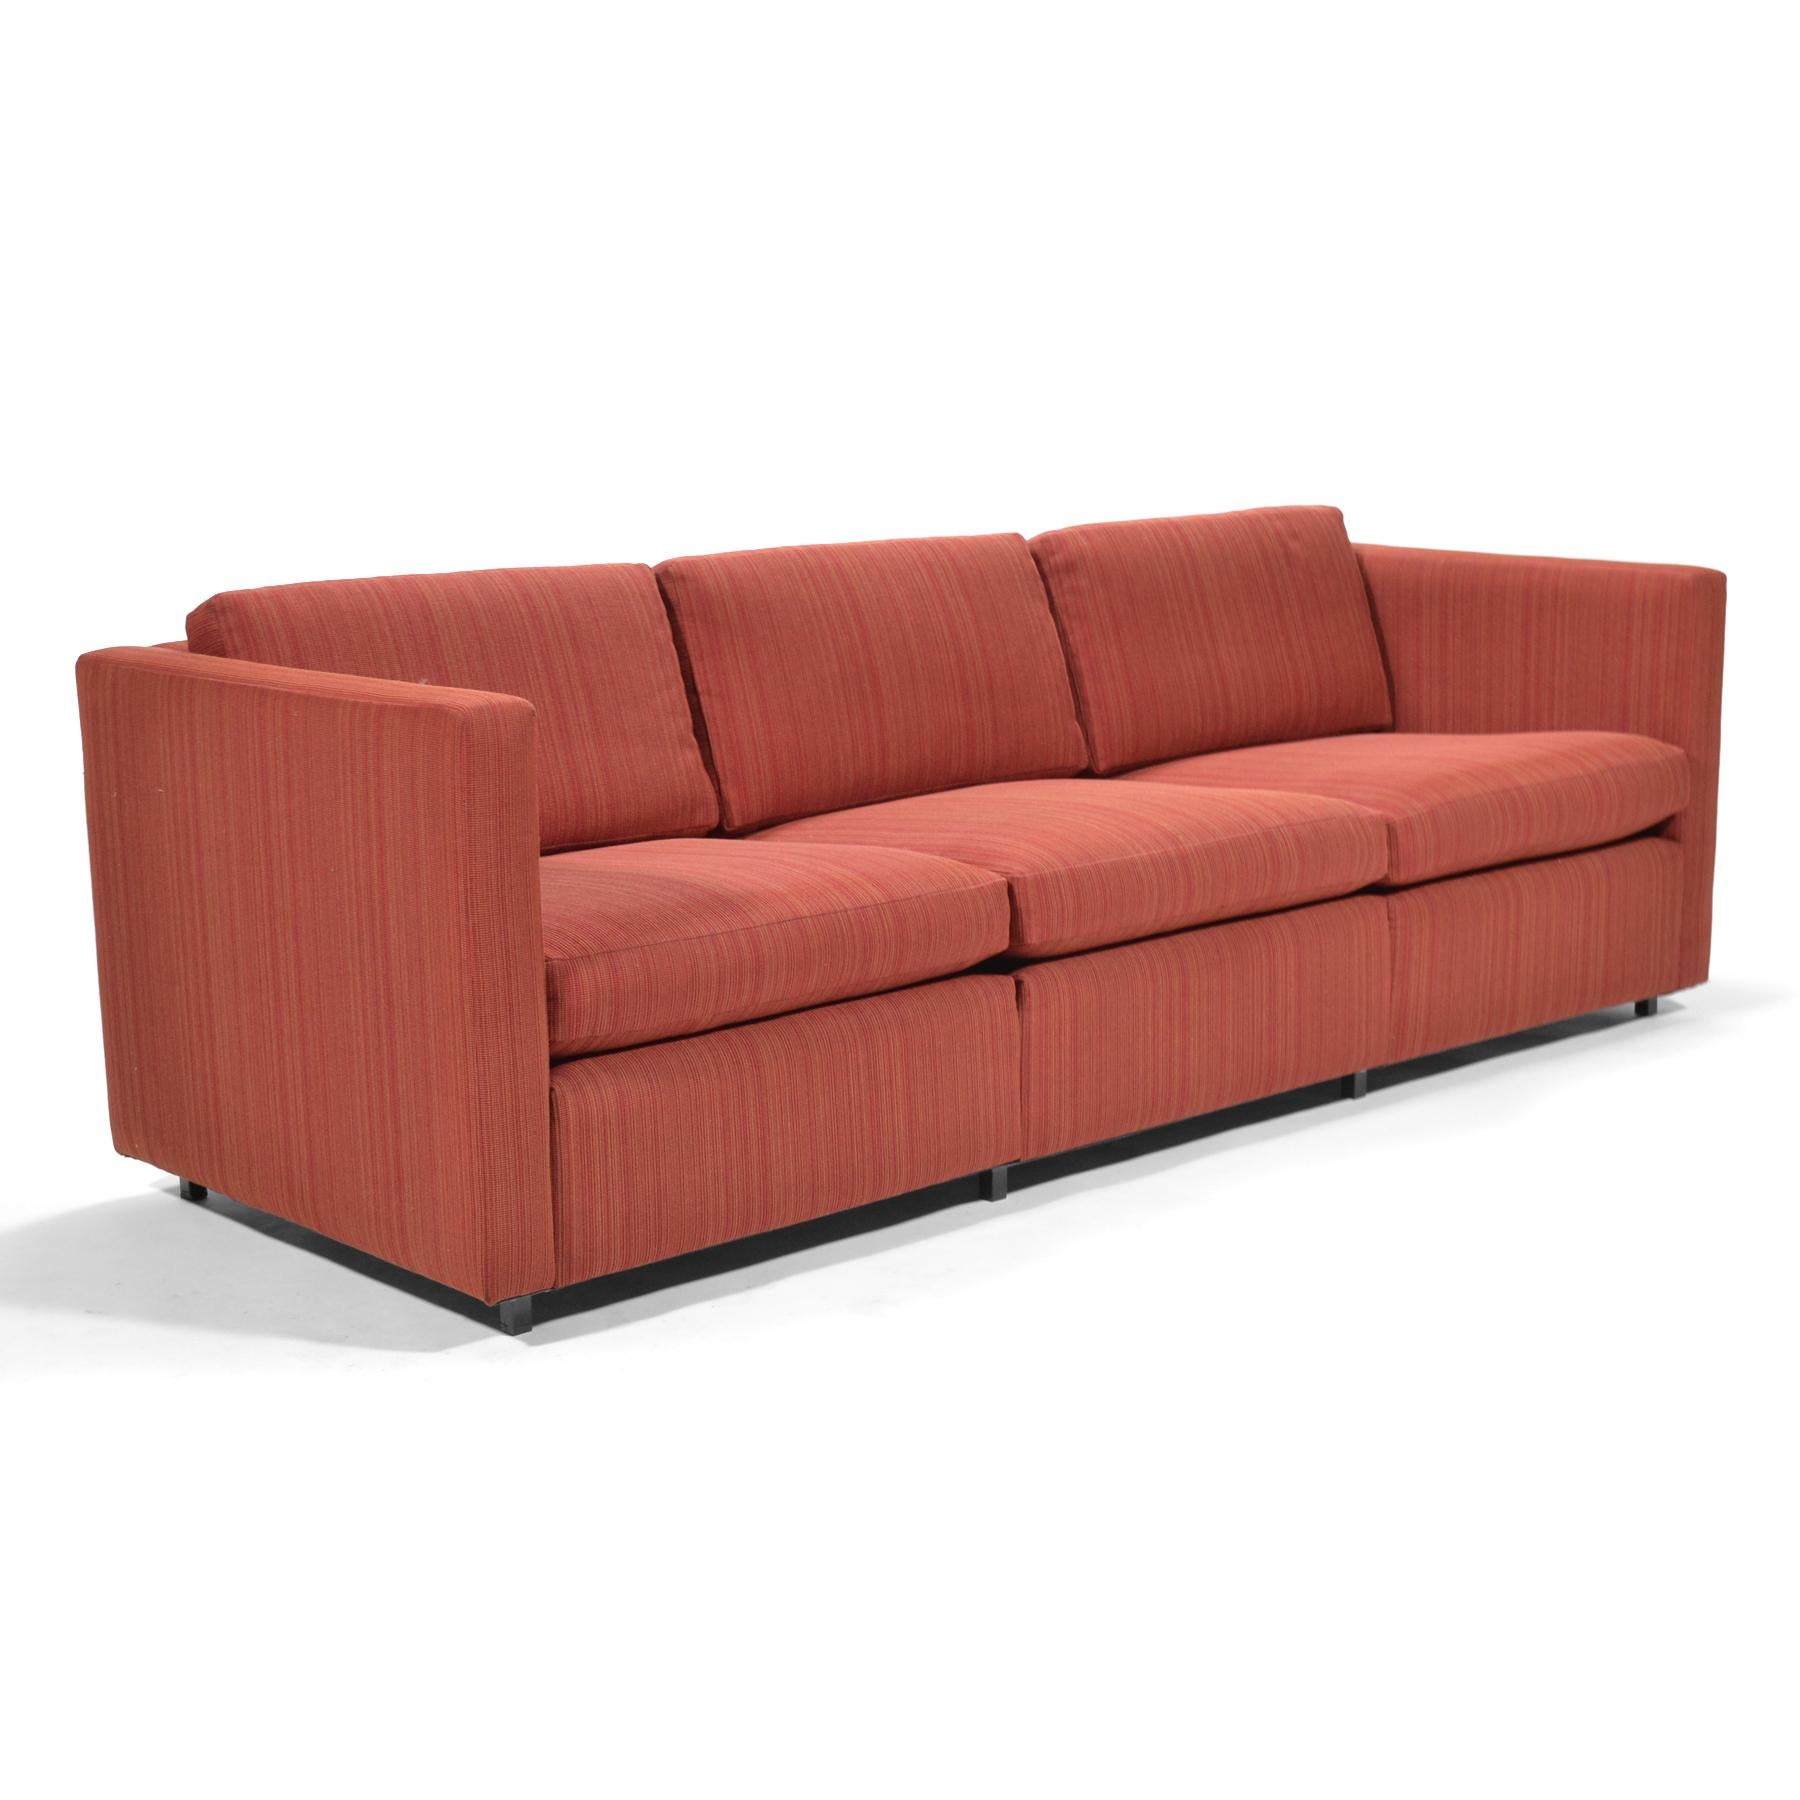 Charles Pfister Petite Sofa by Knoll For Sale at 1stDibs | knoll pfister  sofa, charles pfister sofa, sofa design